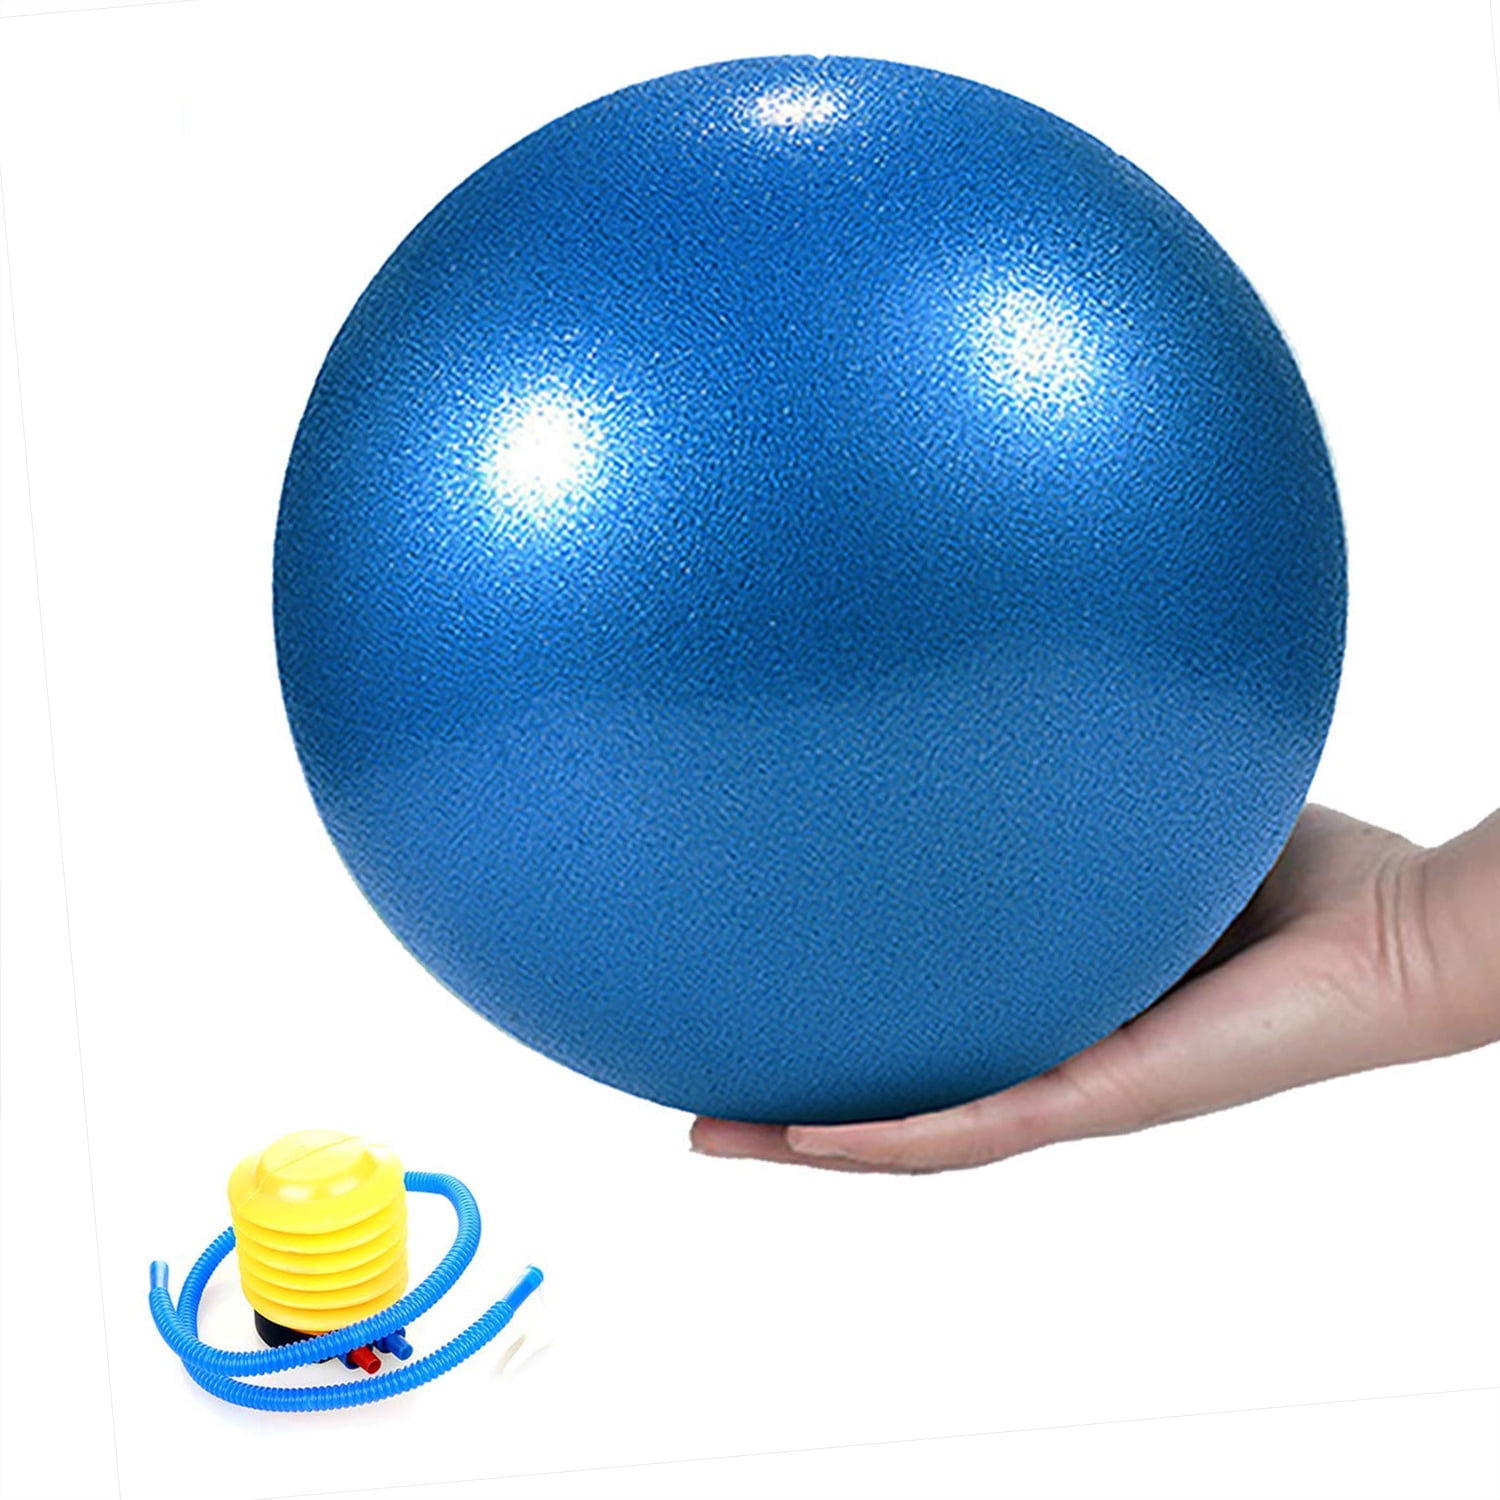 Stability & Balance Training Yoga Class & Barre Workout Professional Grade 9 Inch Anti-Burst Mini Pilates Ball by Live Infinitely Ideal For Home Exercise Needle Valve & Mesh Storage Bag Includes Hand Pump 